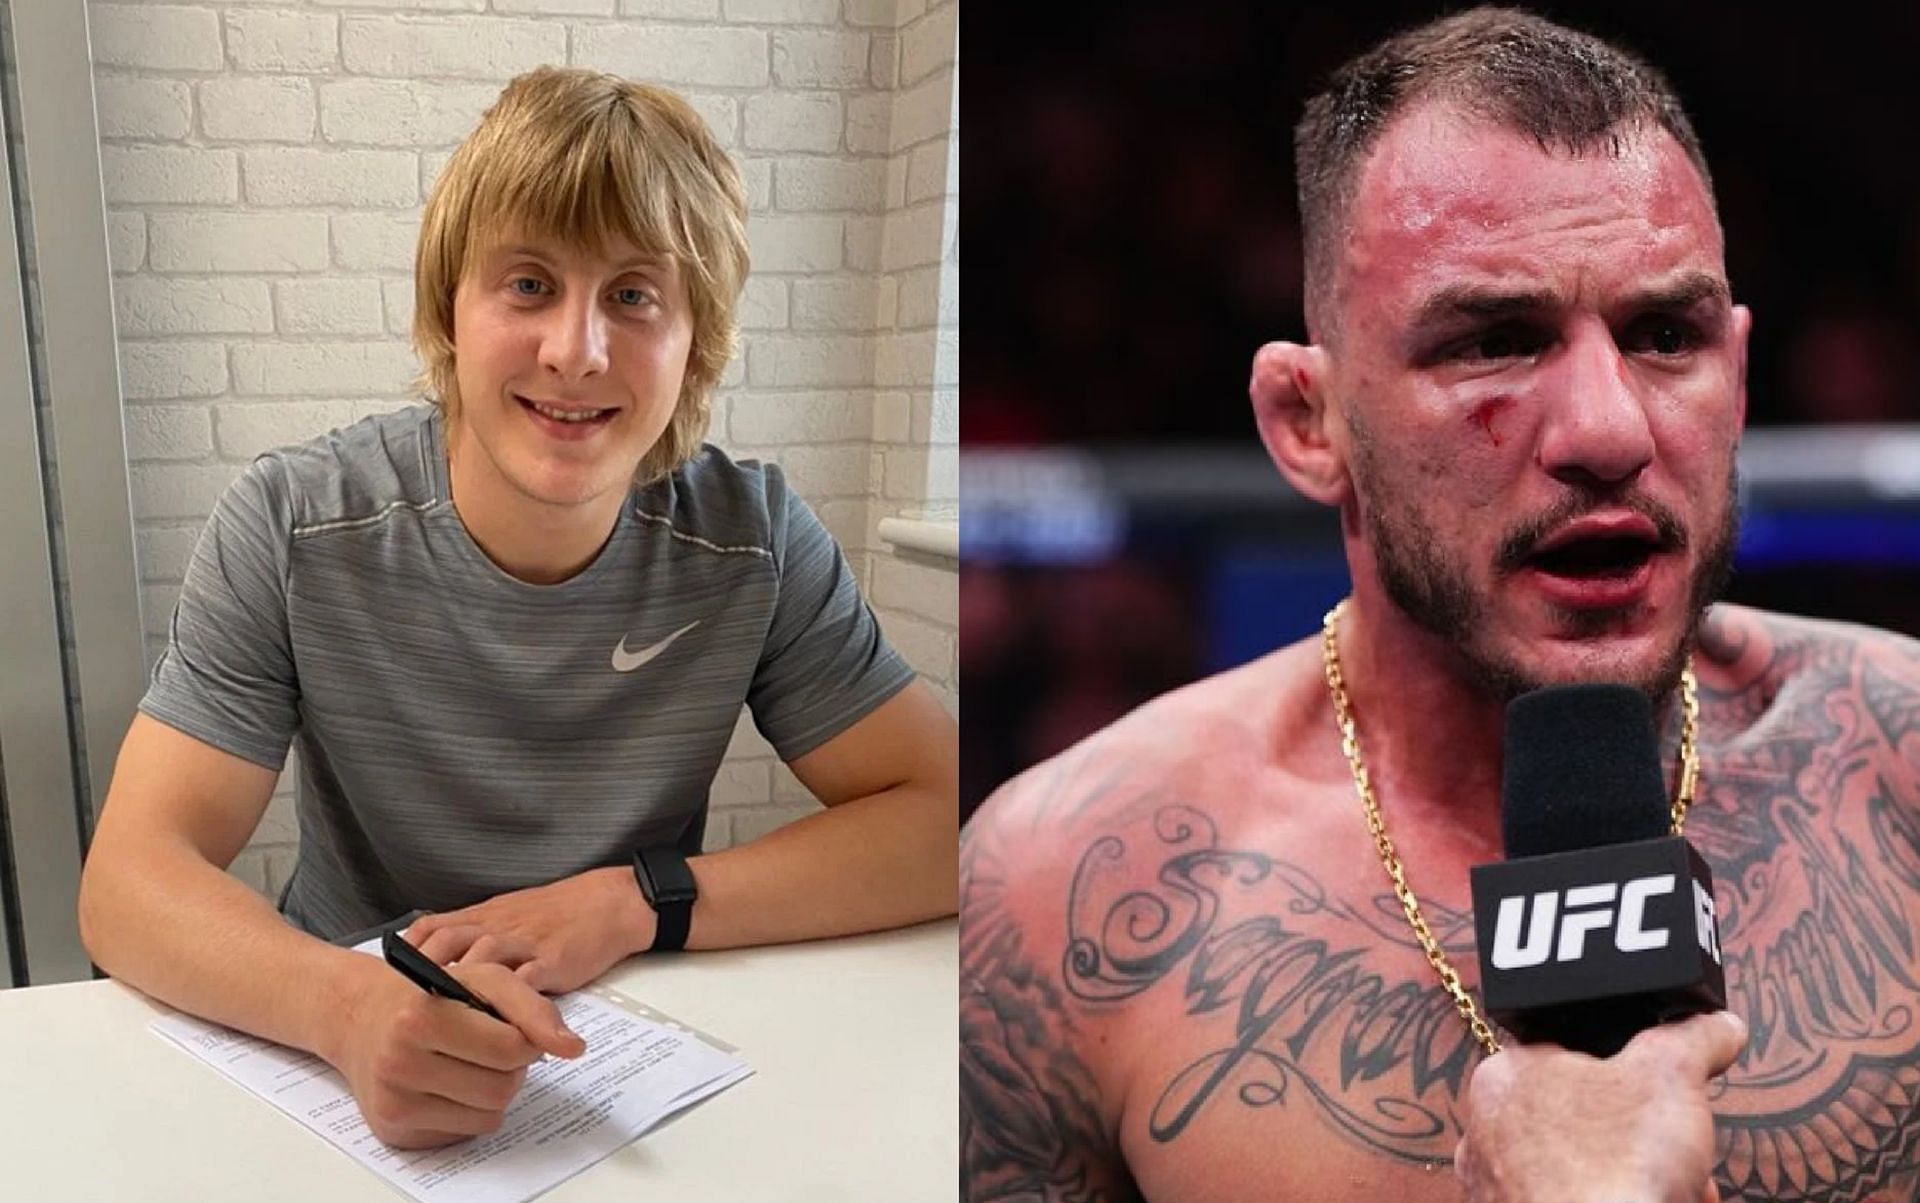 Paddy Pimblett (left) and Renato Moicano (right) continue their war of words online [Images Courtesy: @renato_moicano_ufc on Instagram and @PaddyTheBaddy on X]